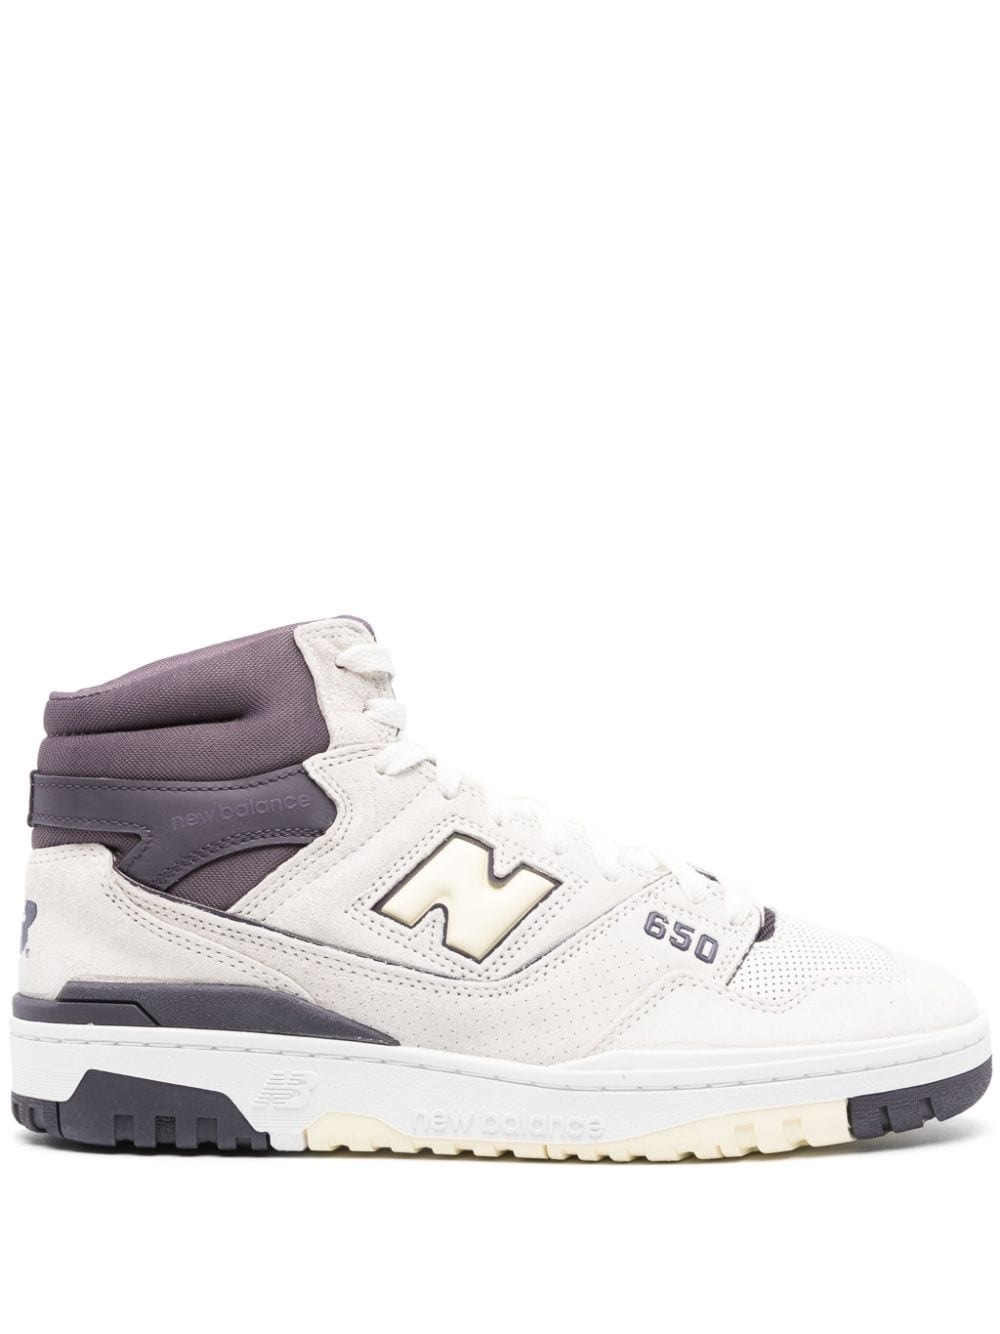 New Balance 650 high-top leather sneakers - White